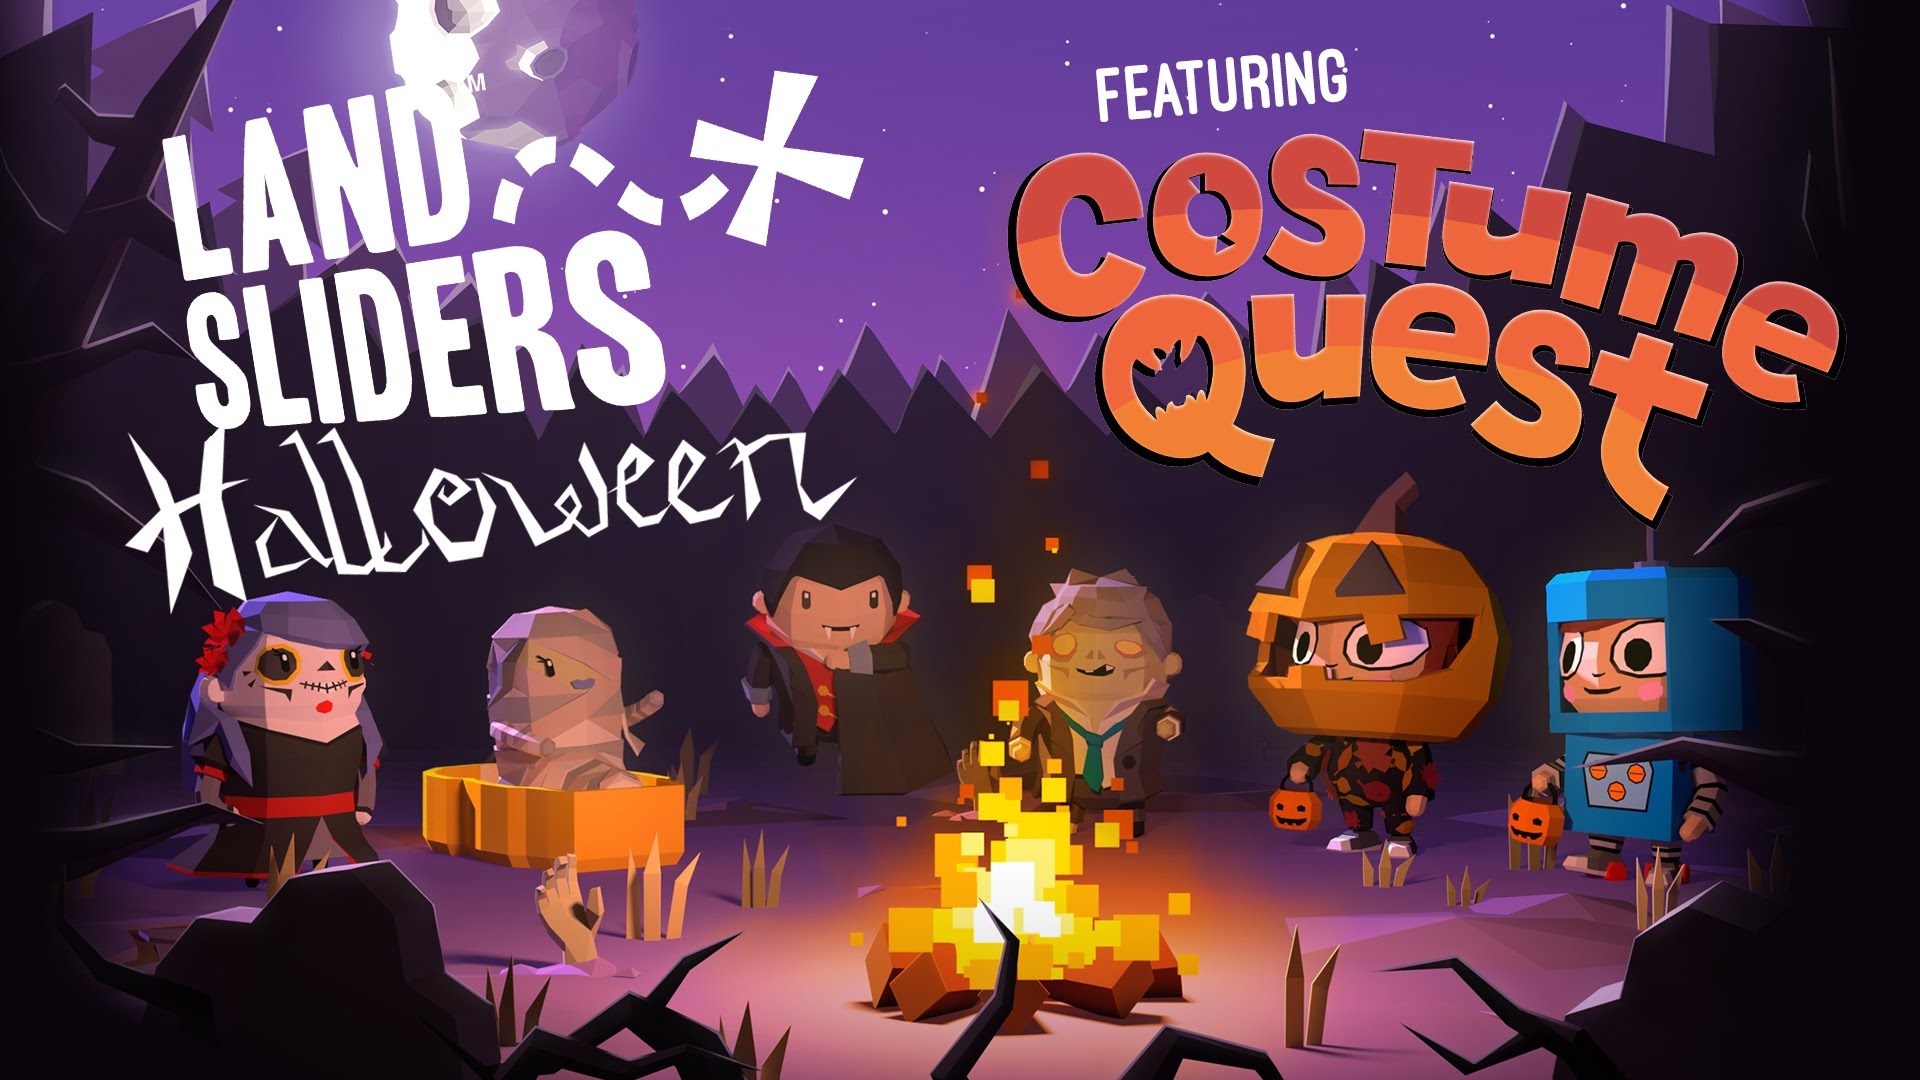 Costume Quest Comes to Land Sliders in Halloween Update